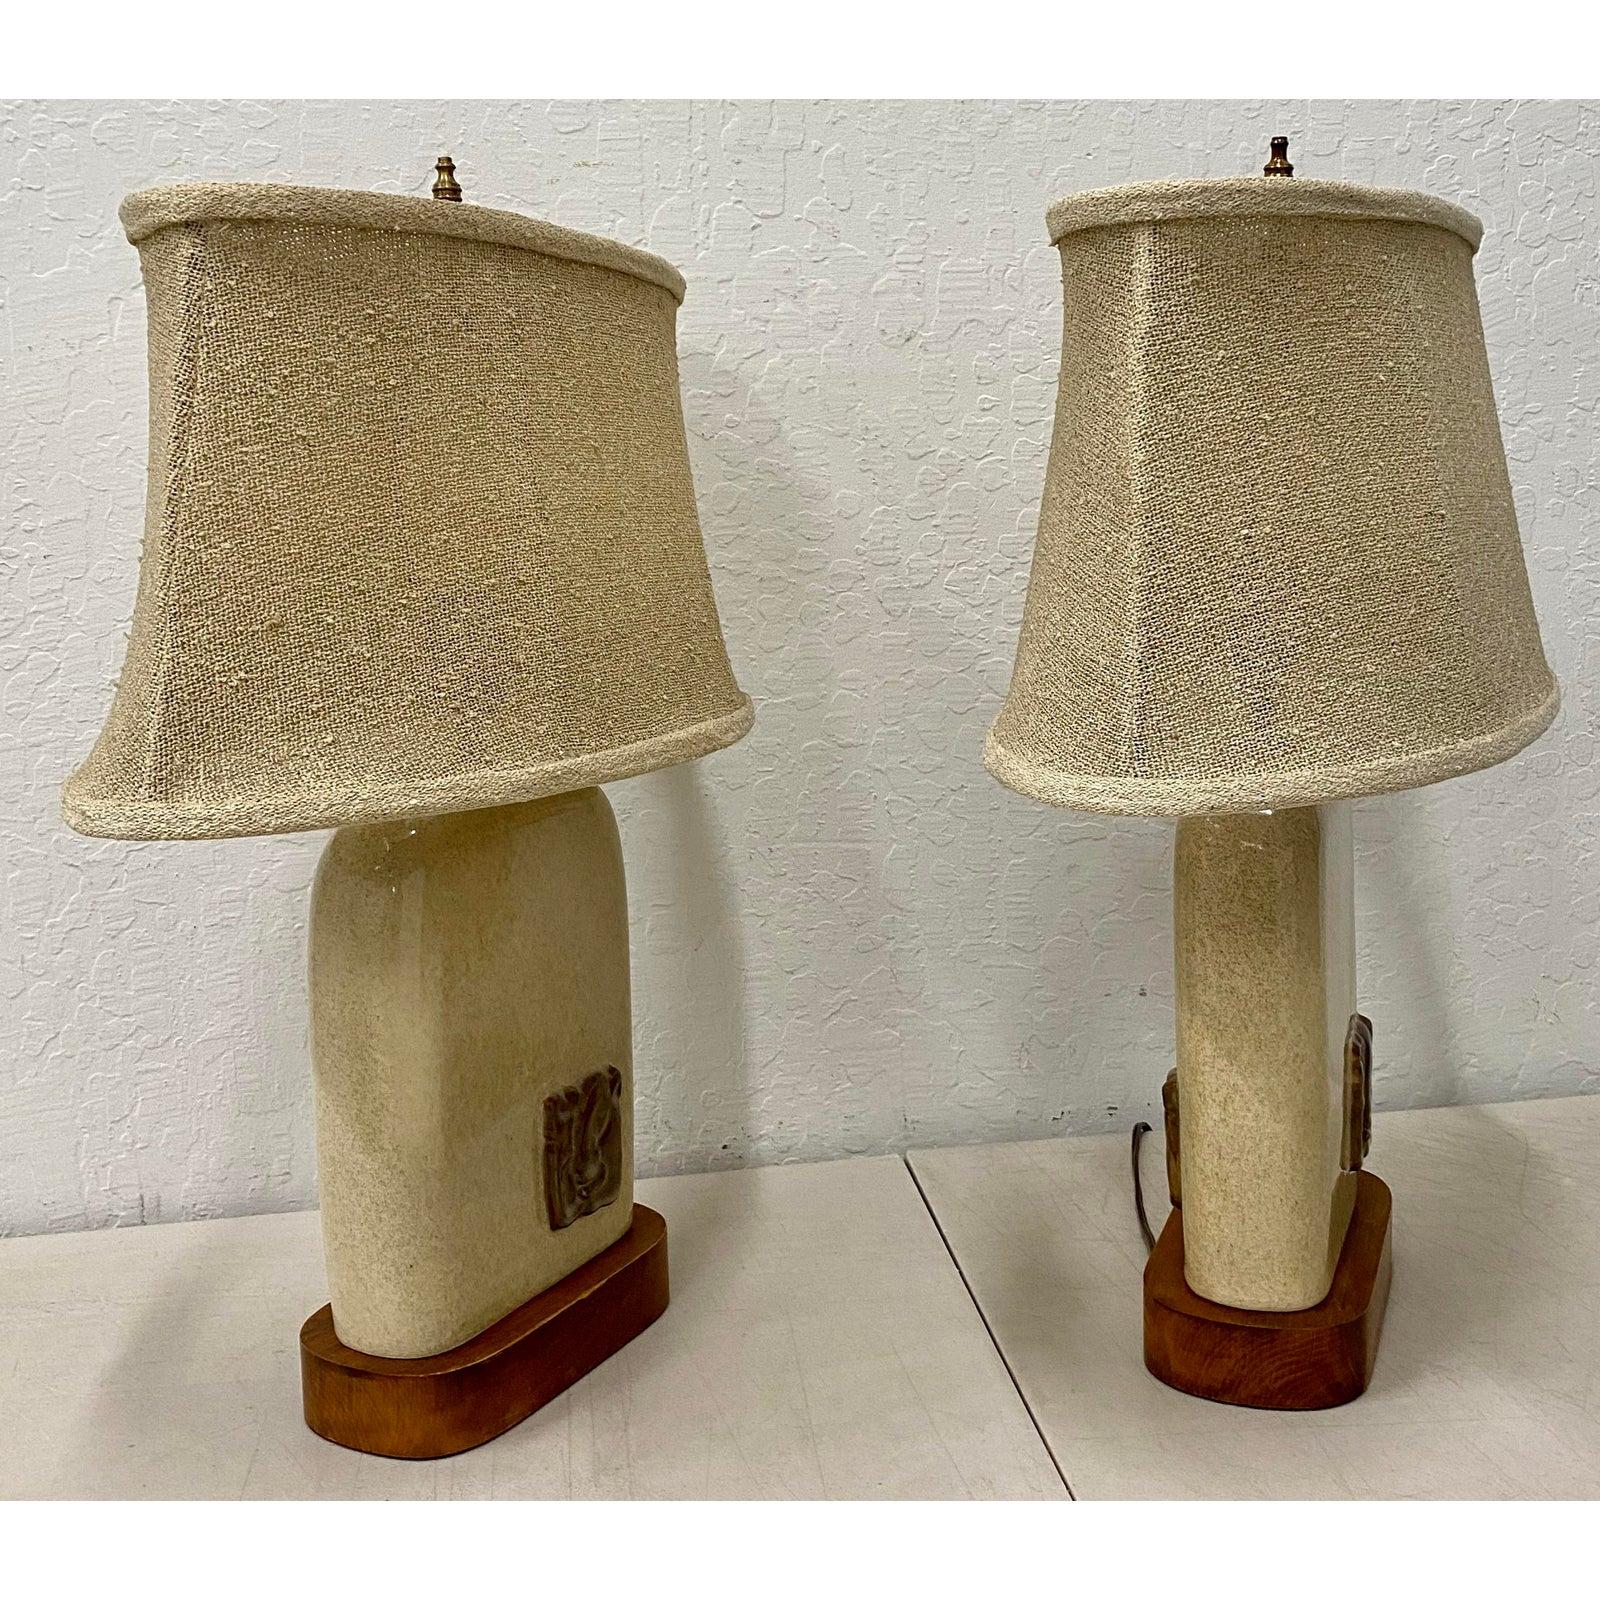 Mid-Century Modern Pair of Vintage Glazed Ceramic Lamps with Mayan Inspired Ceramic Medallions